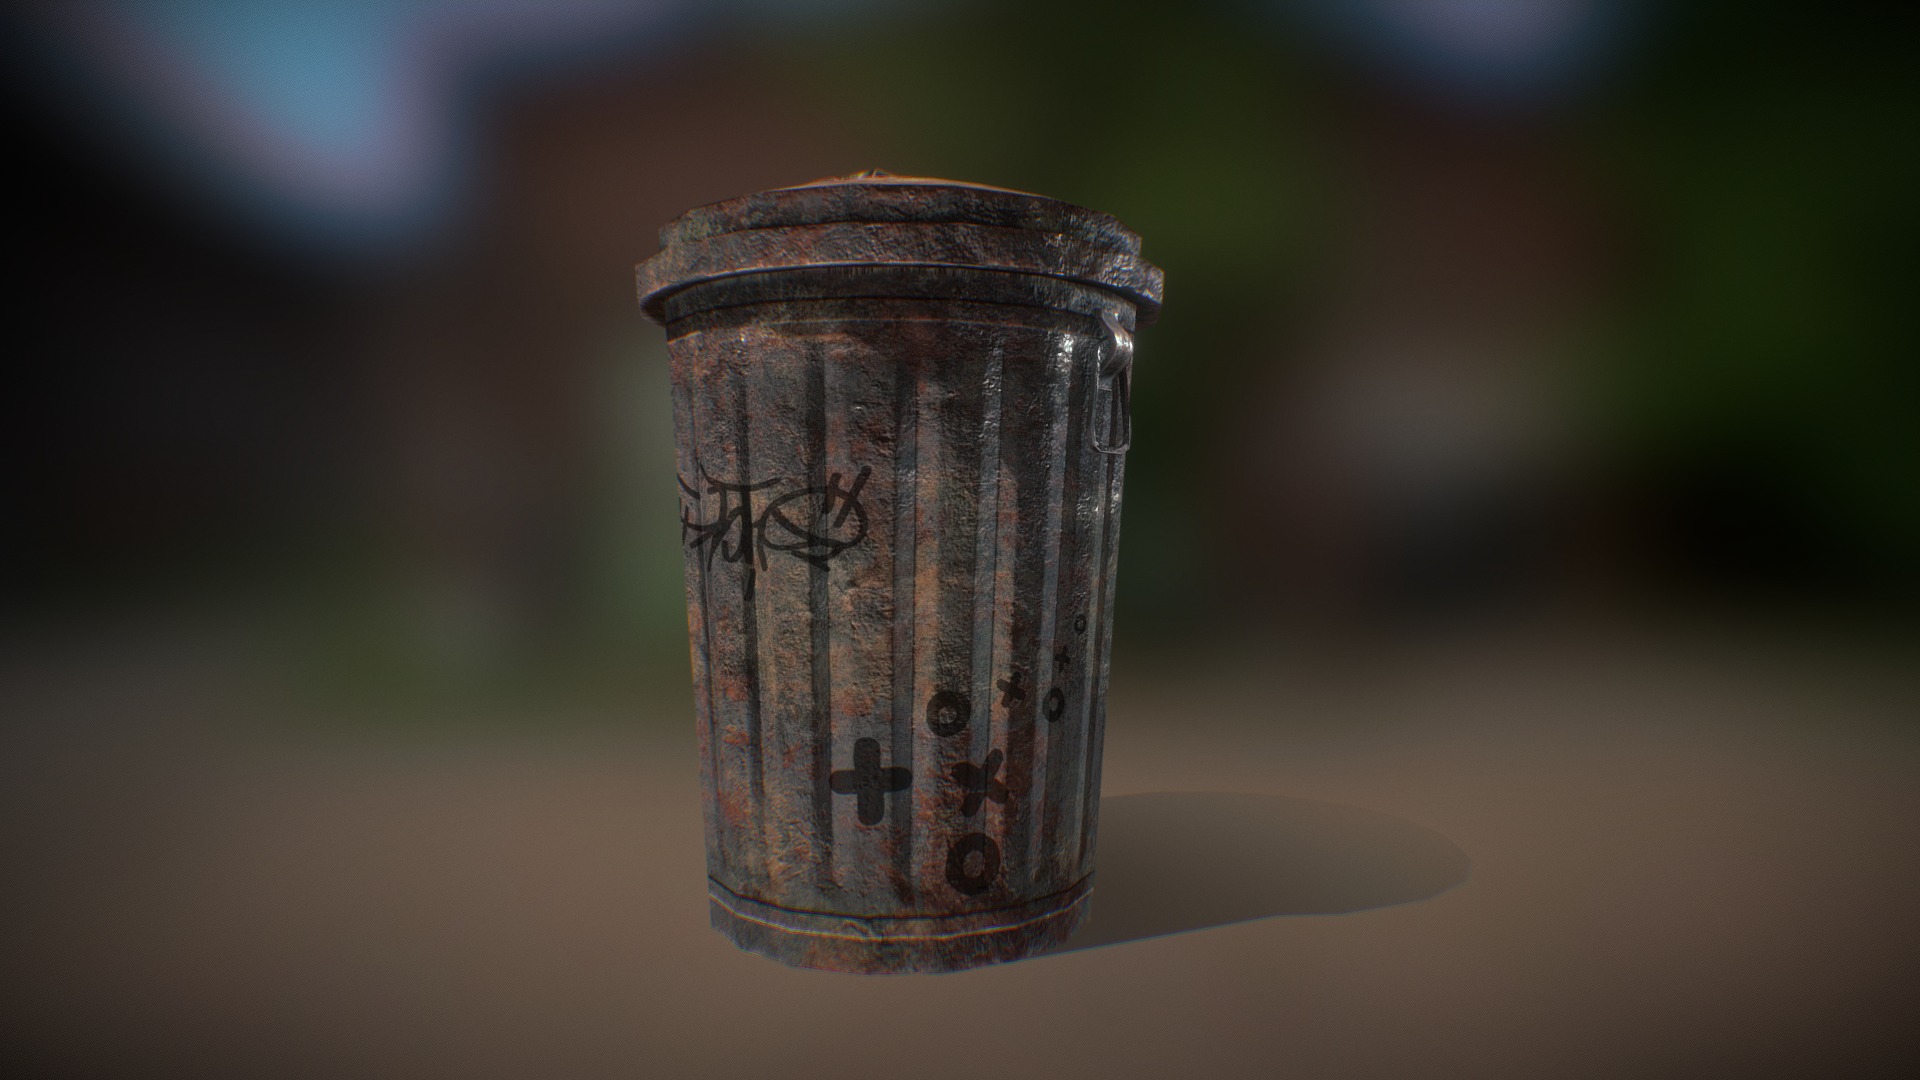 3D model Trashcan - This is a 3D model of the Trashcan. The 3D model is about a glass jar with a brown substance.